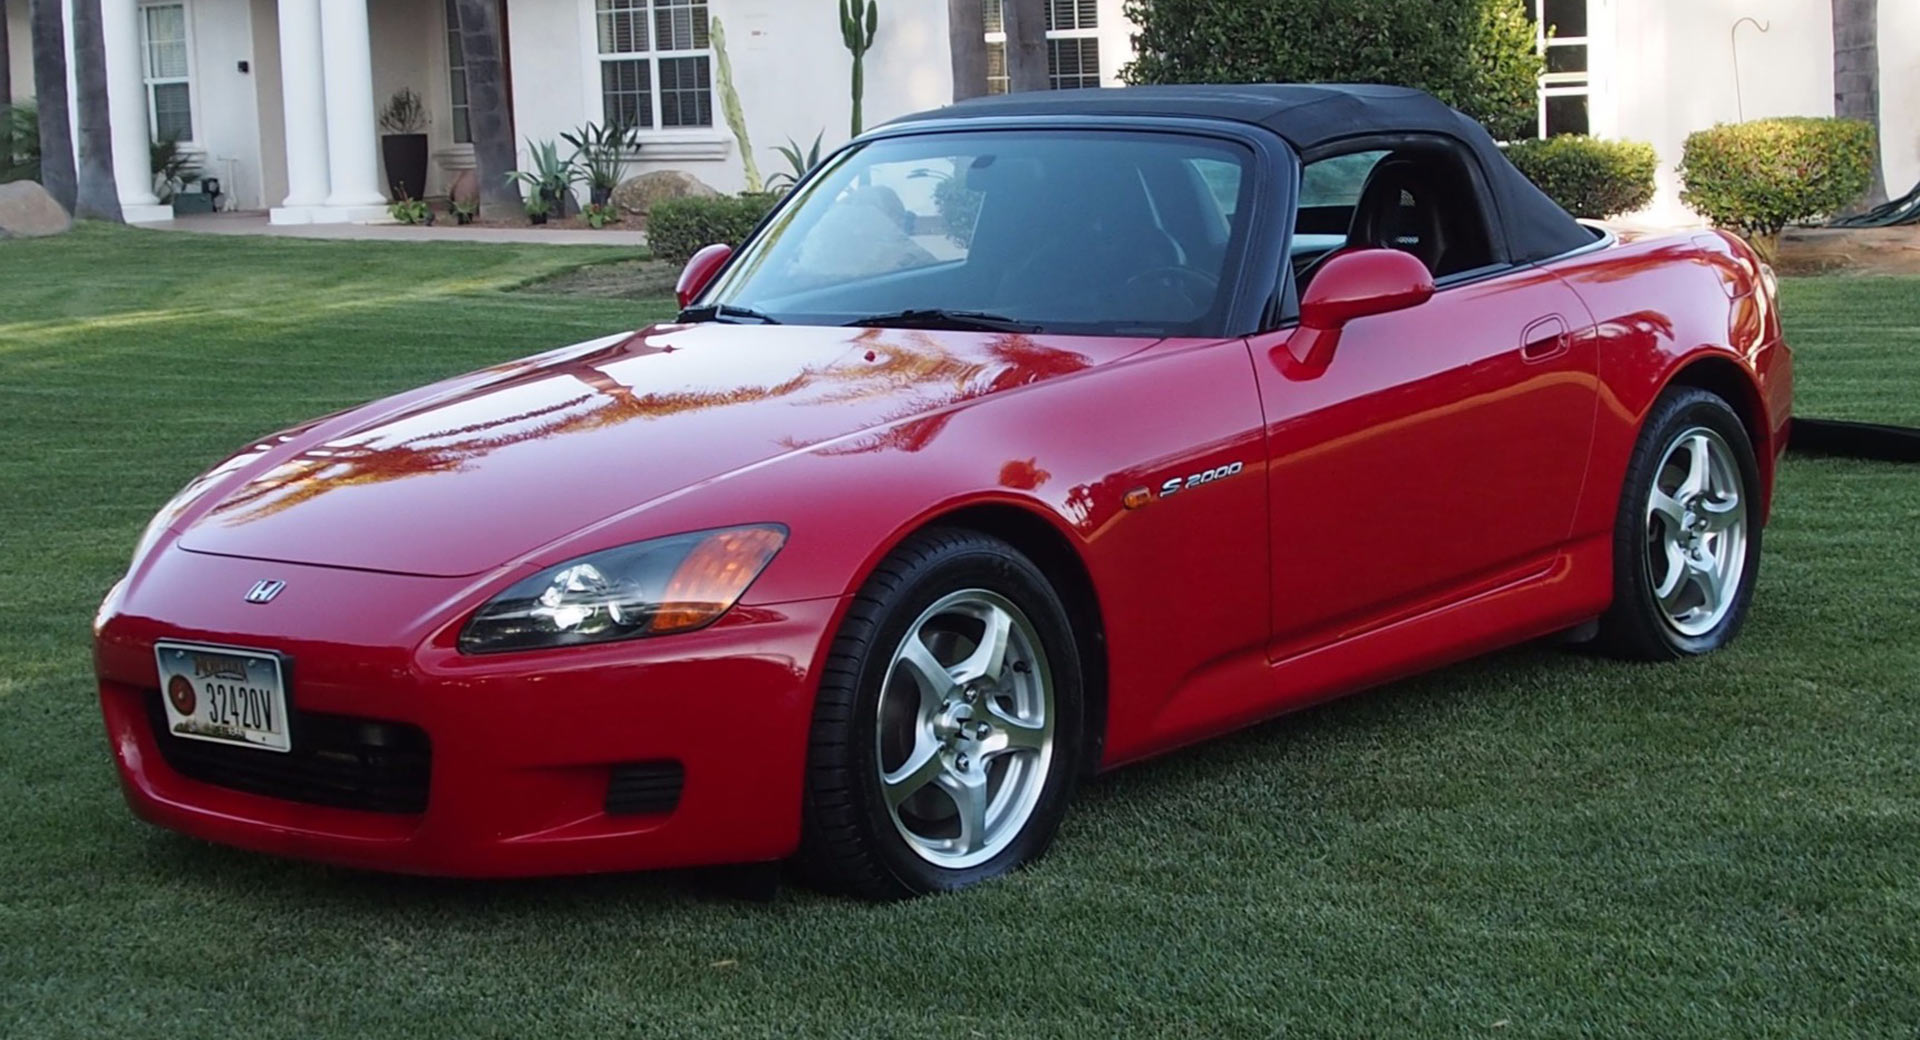 One Owner 2000 Honda S2000 Is A Modern Classic With A Fresh Engine |  Carscoops